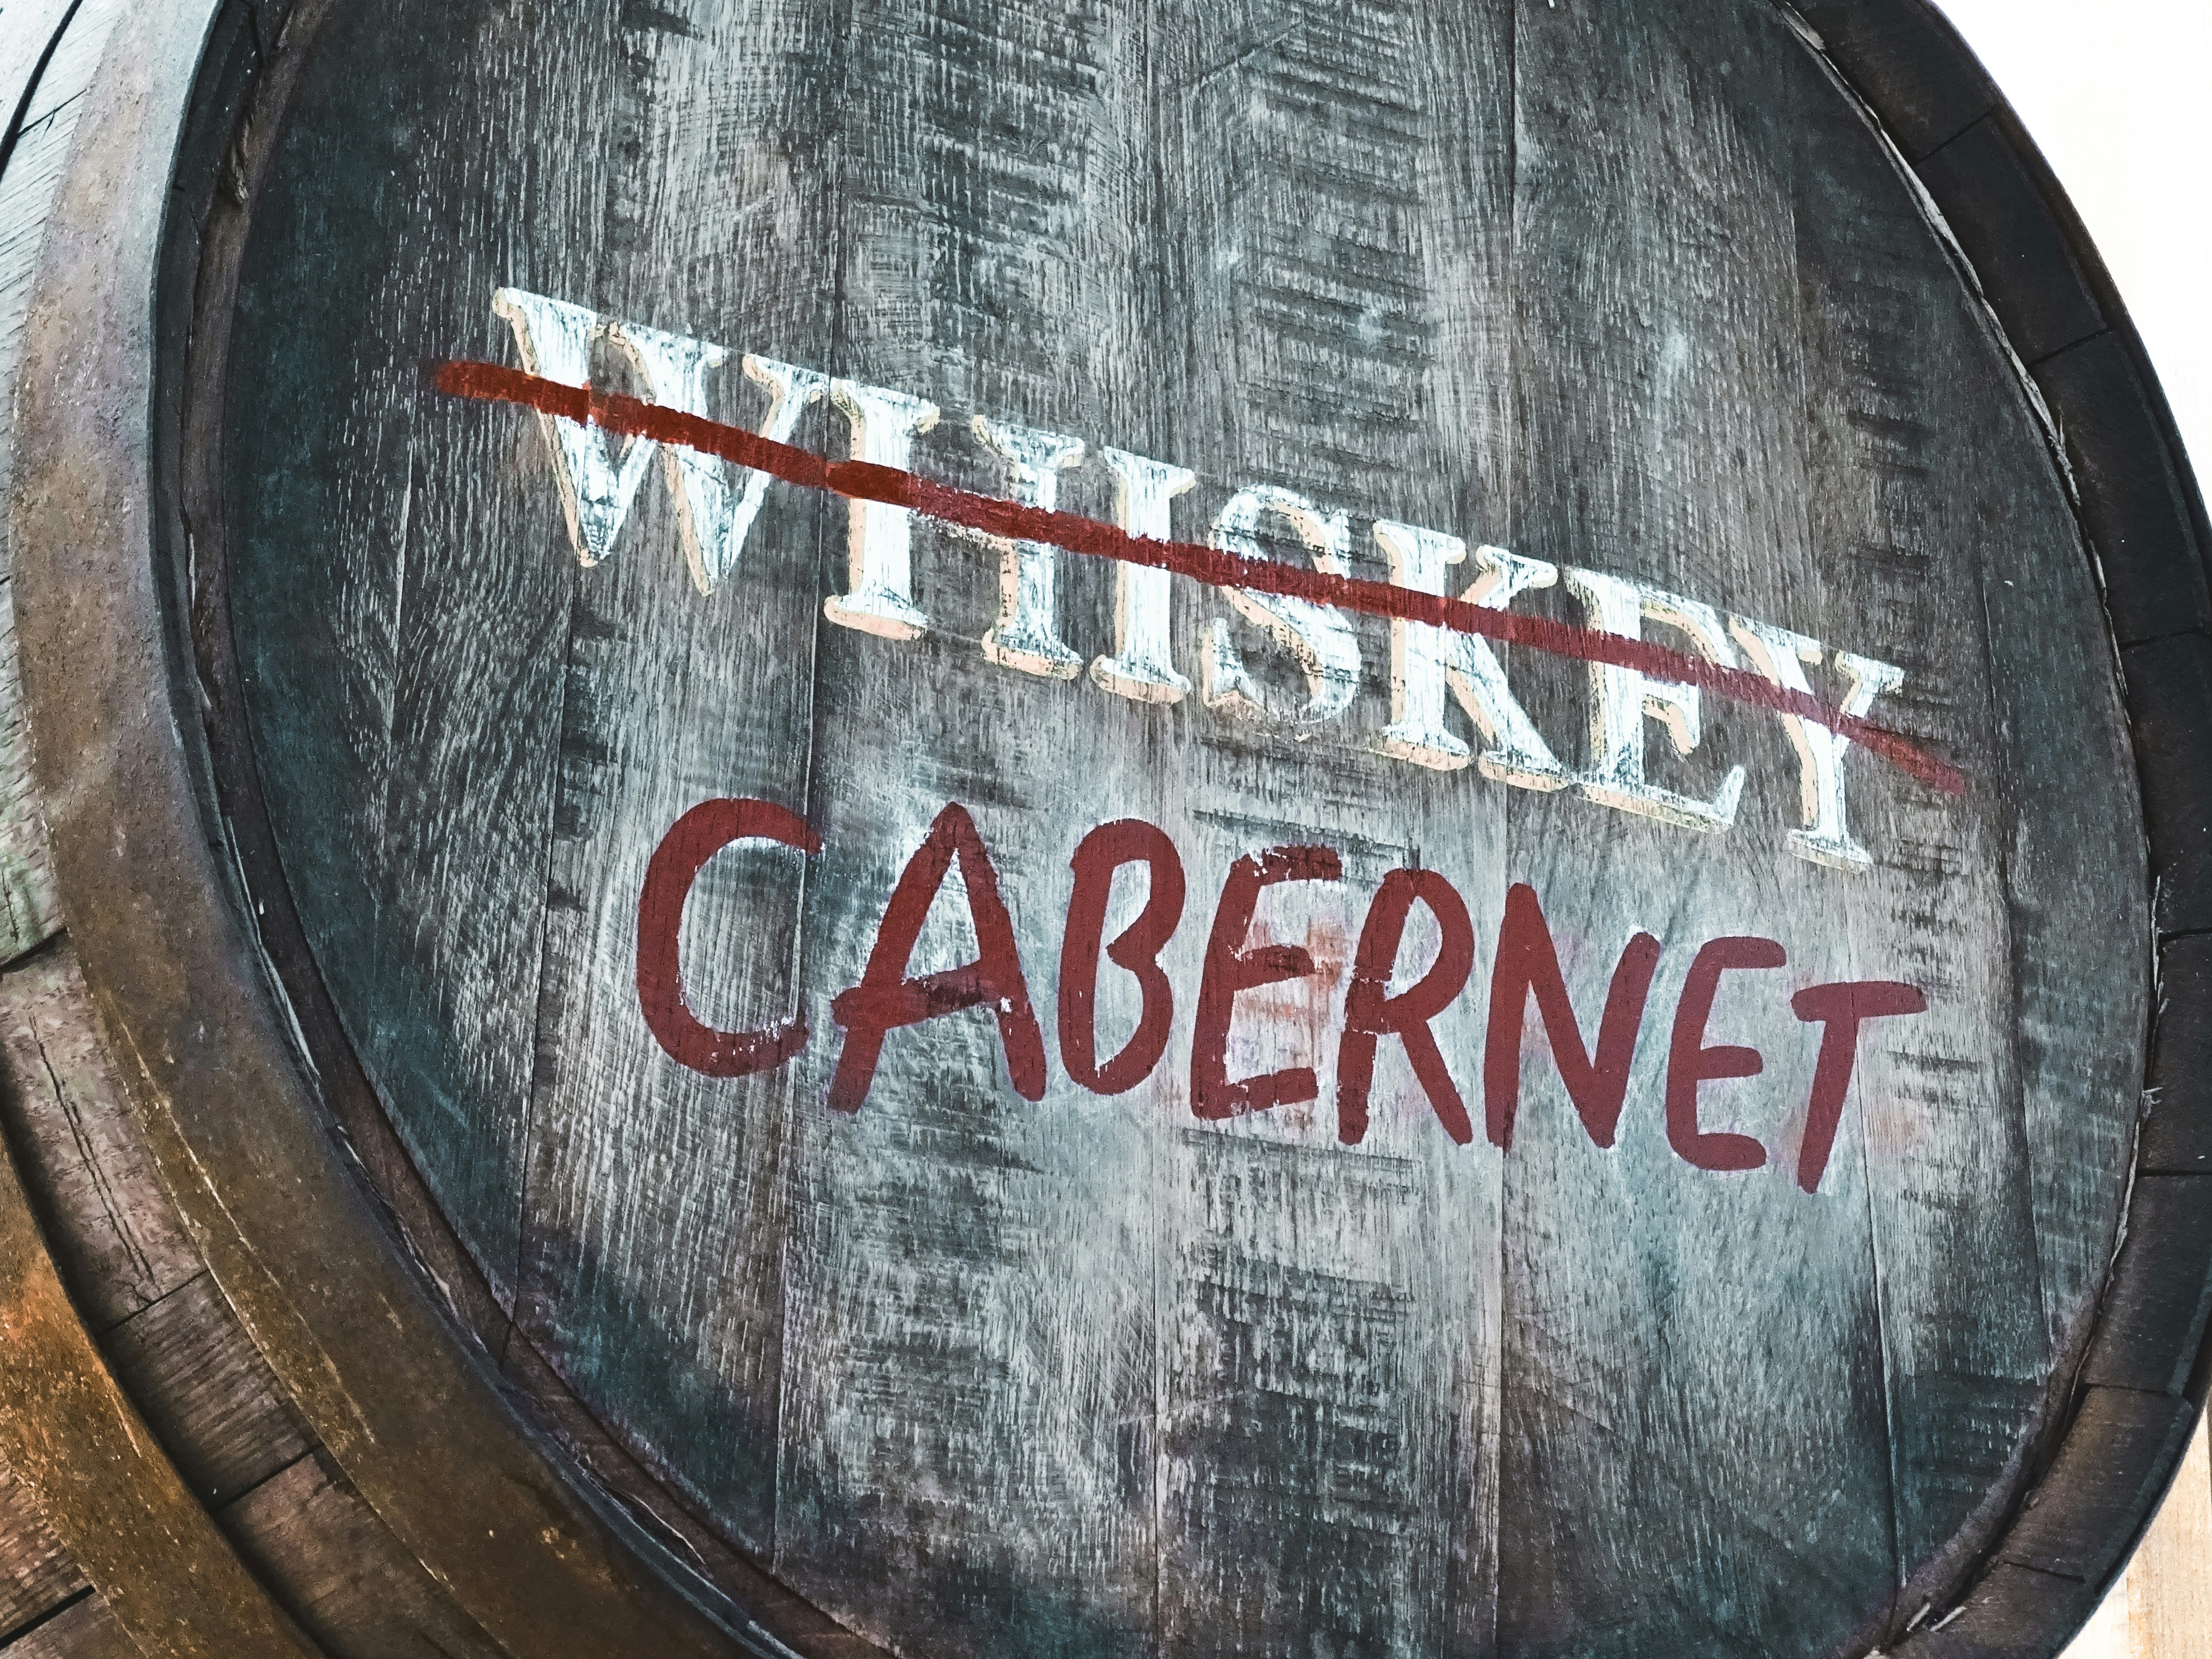 A barrel of Cabernet or maybe Whiskey